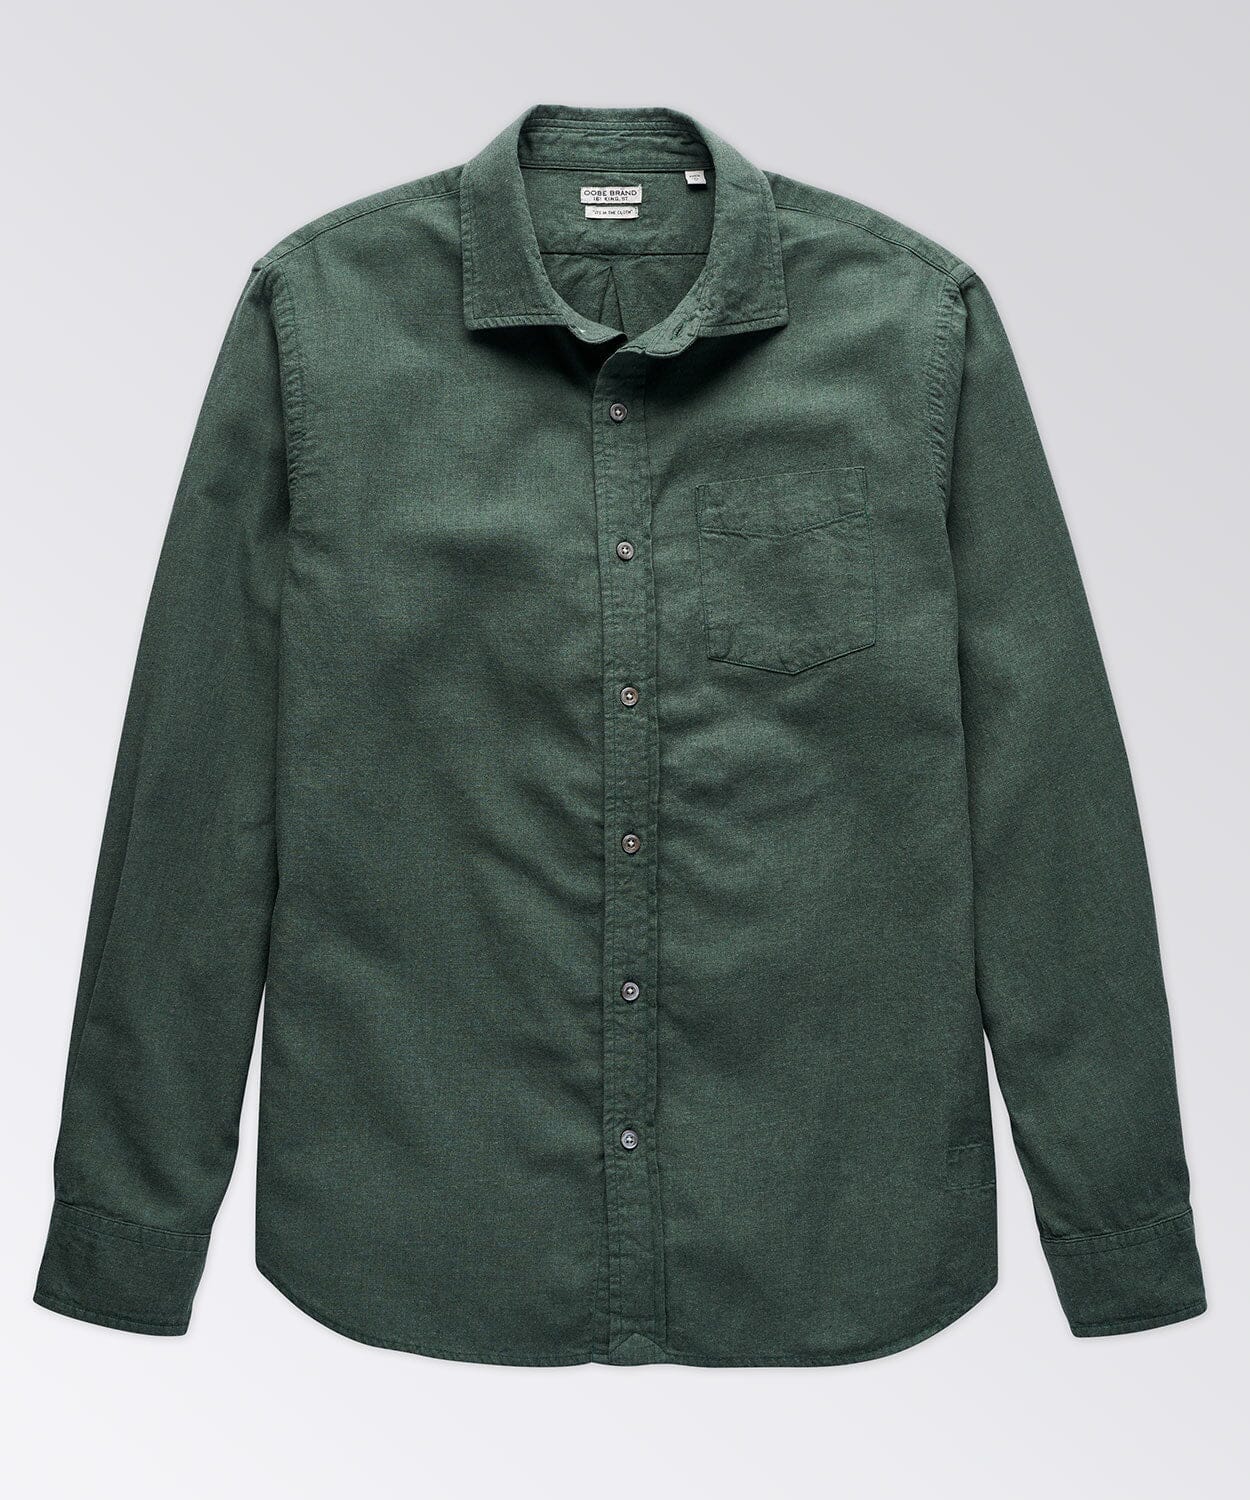 Excella Brushed Heather Twill Shirt Button Downs OOBE BRAND Dark Green S 